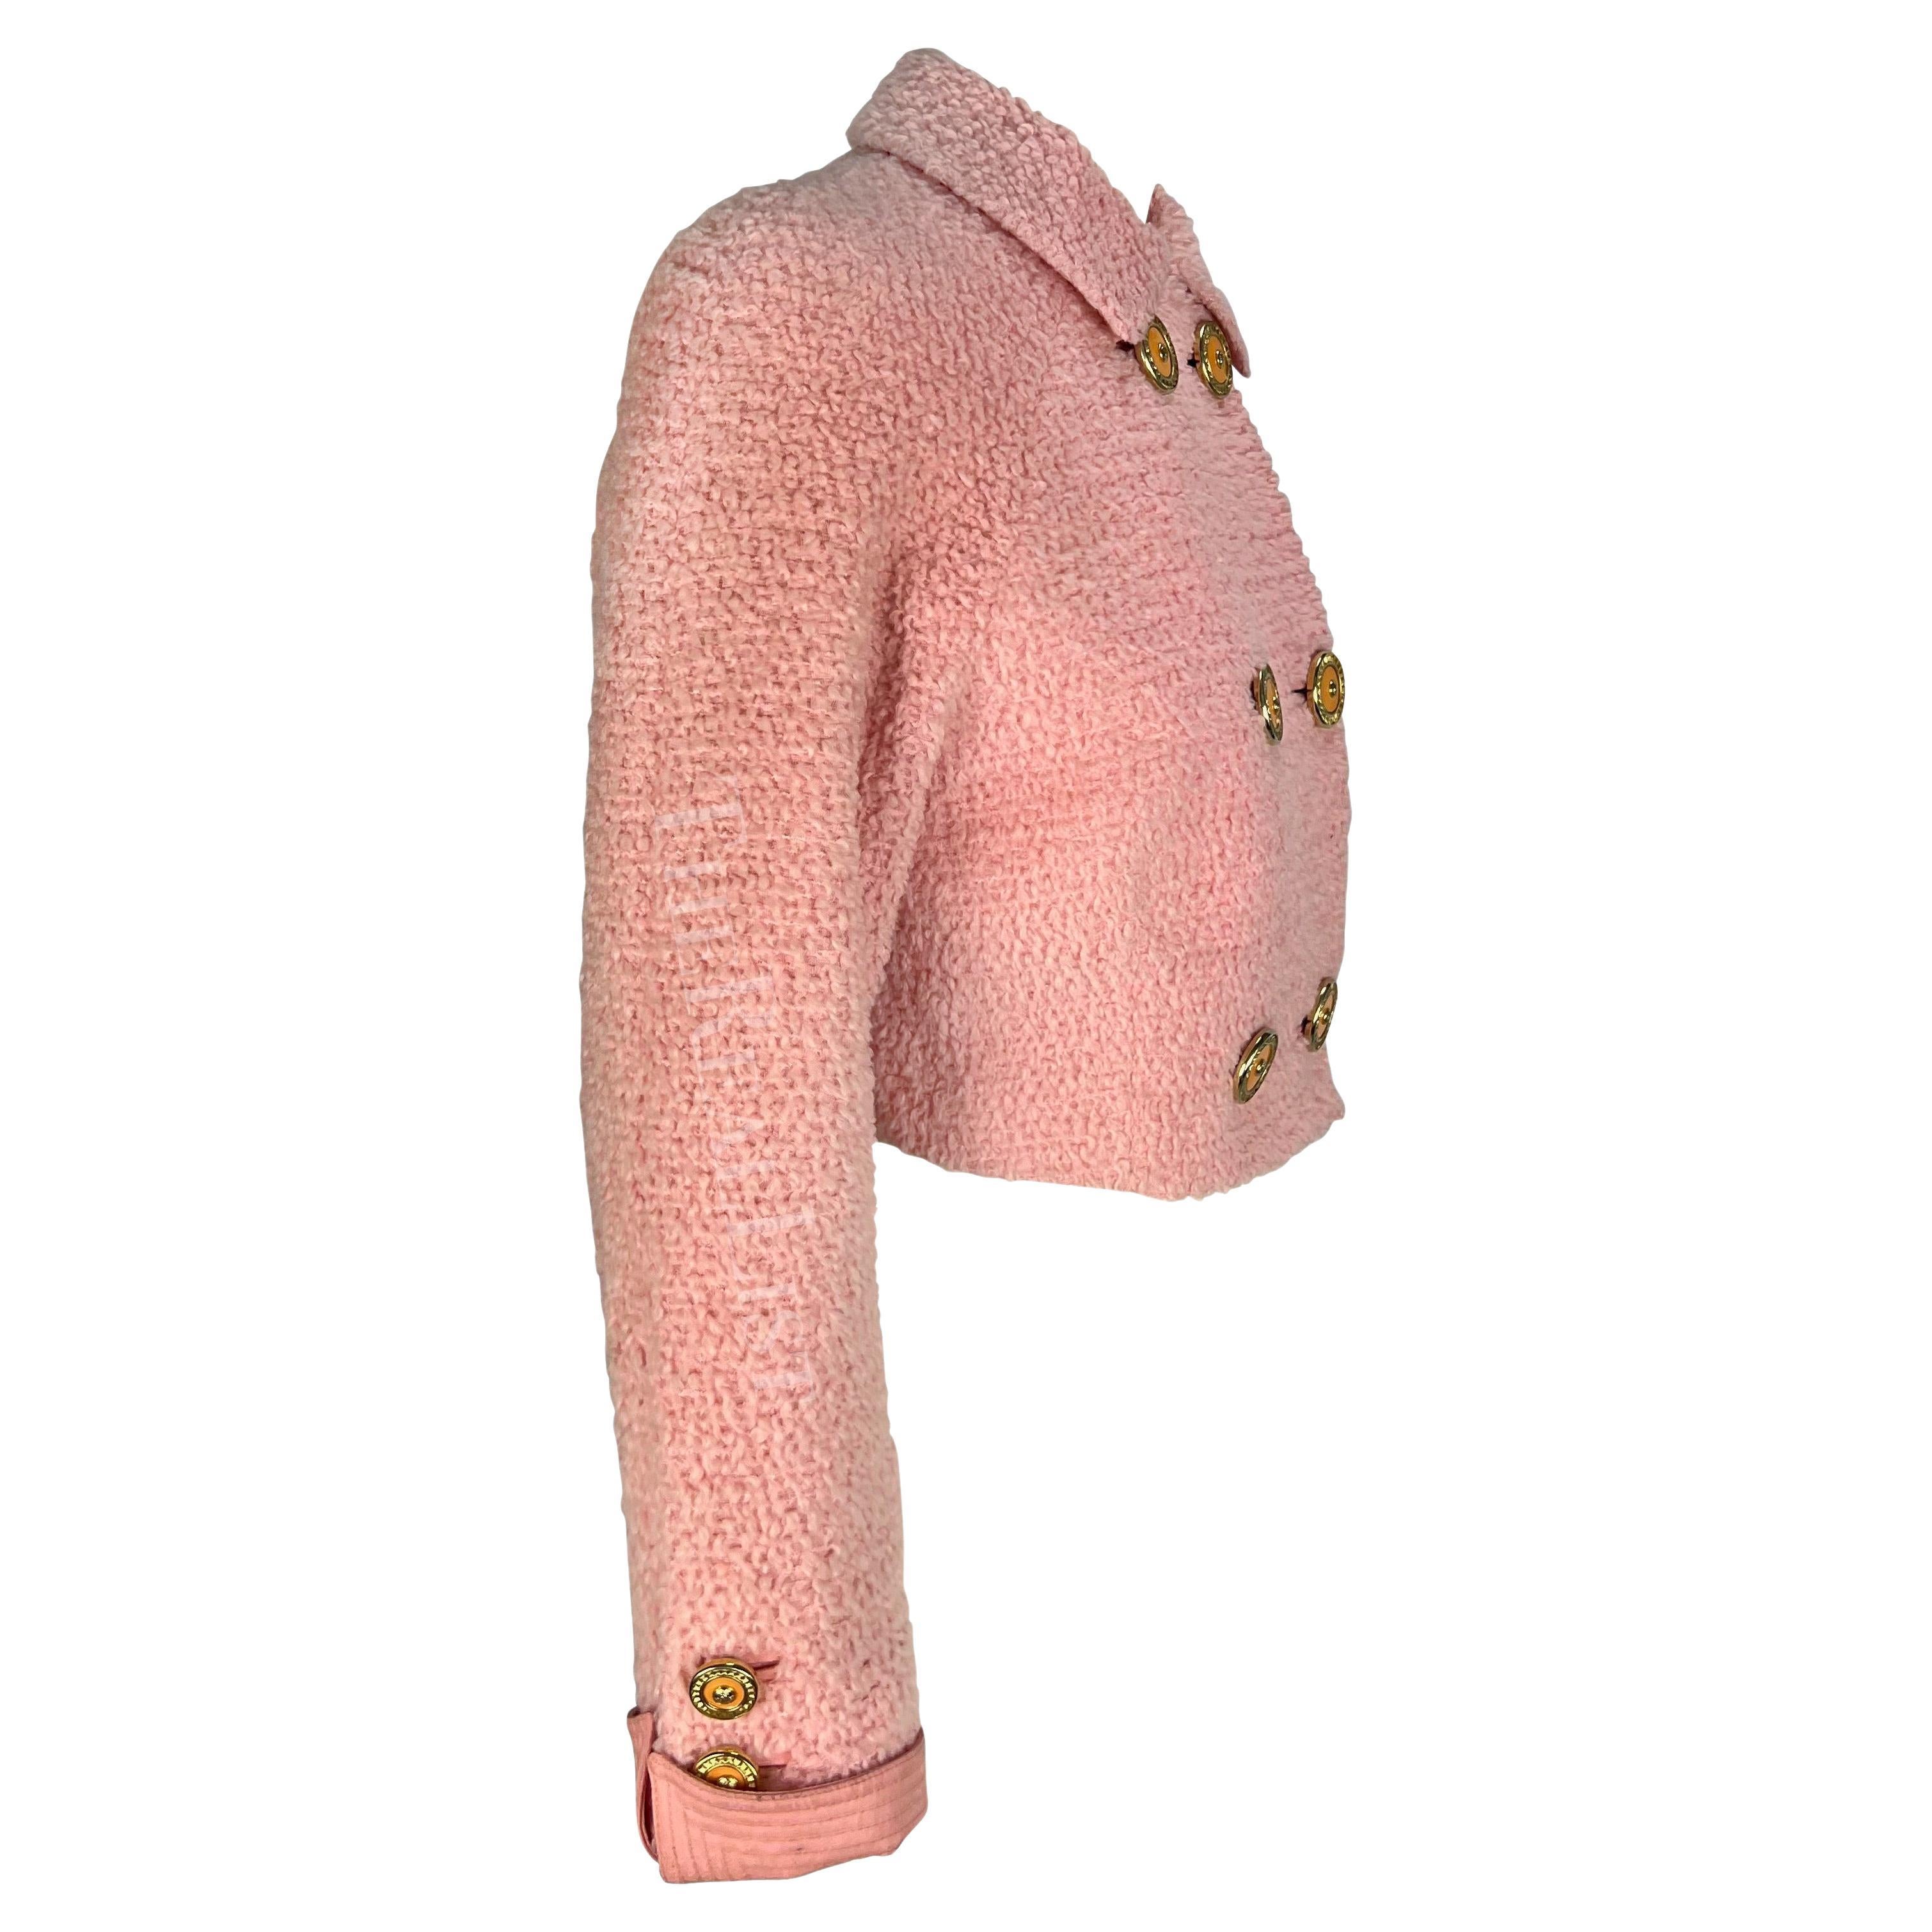 F/W 1994 Gianni Versace Light Pink Tweed Cropped Double Breasted Runway Jacket For Sale 3